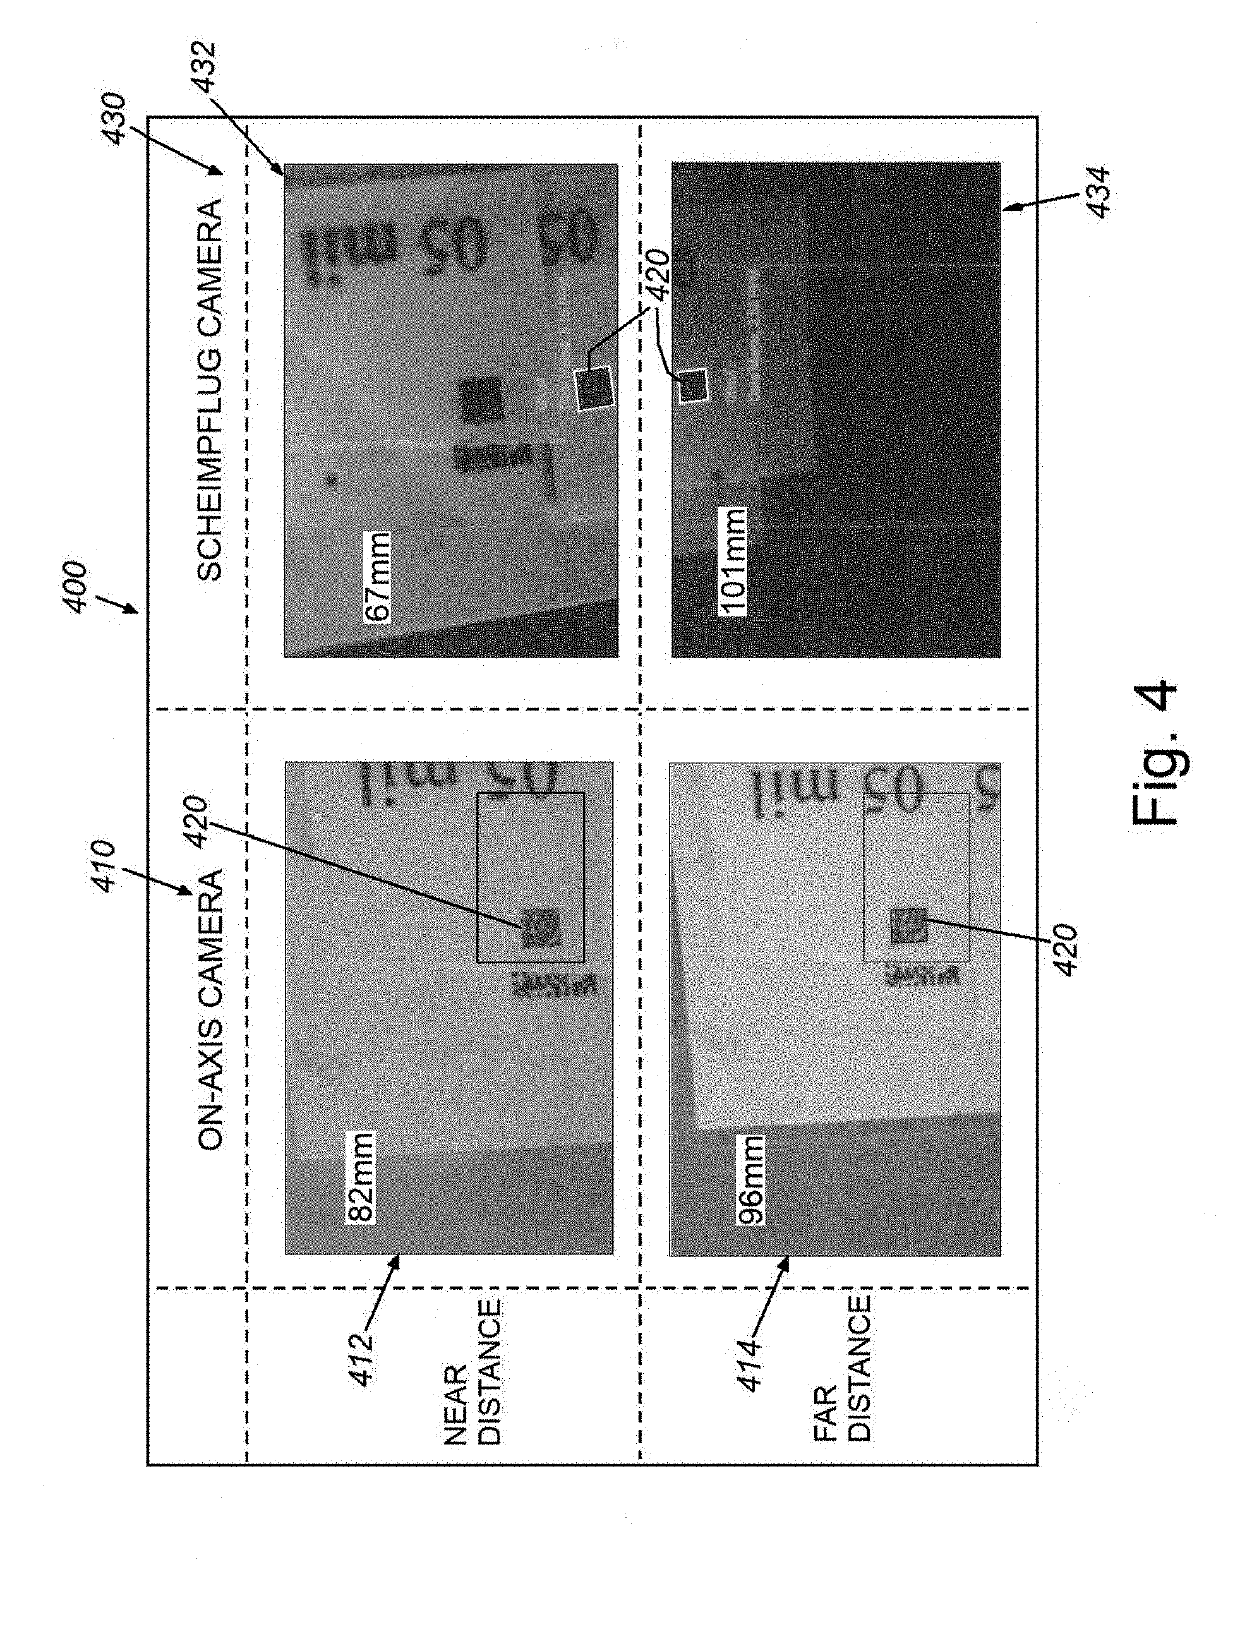 Dual-imaging vision system camera and method for using the same